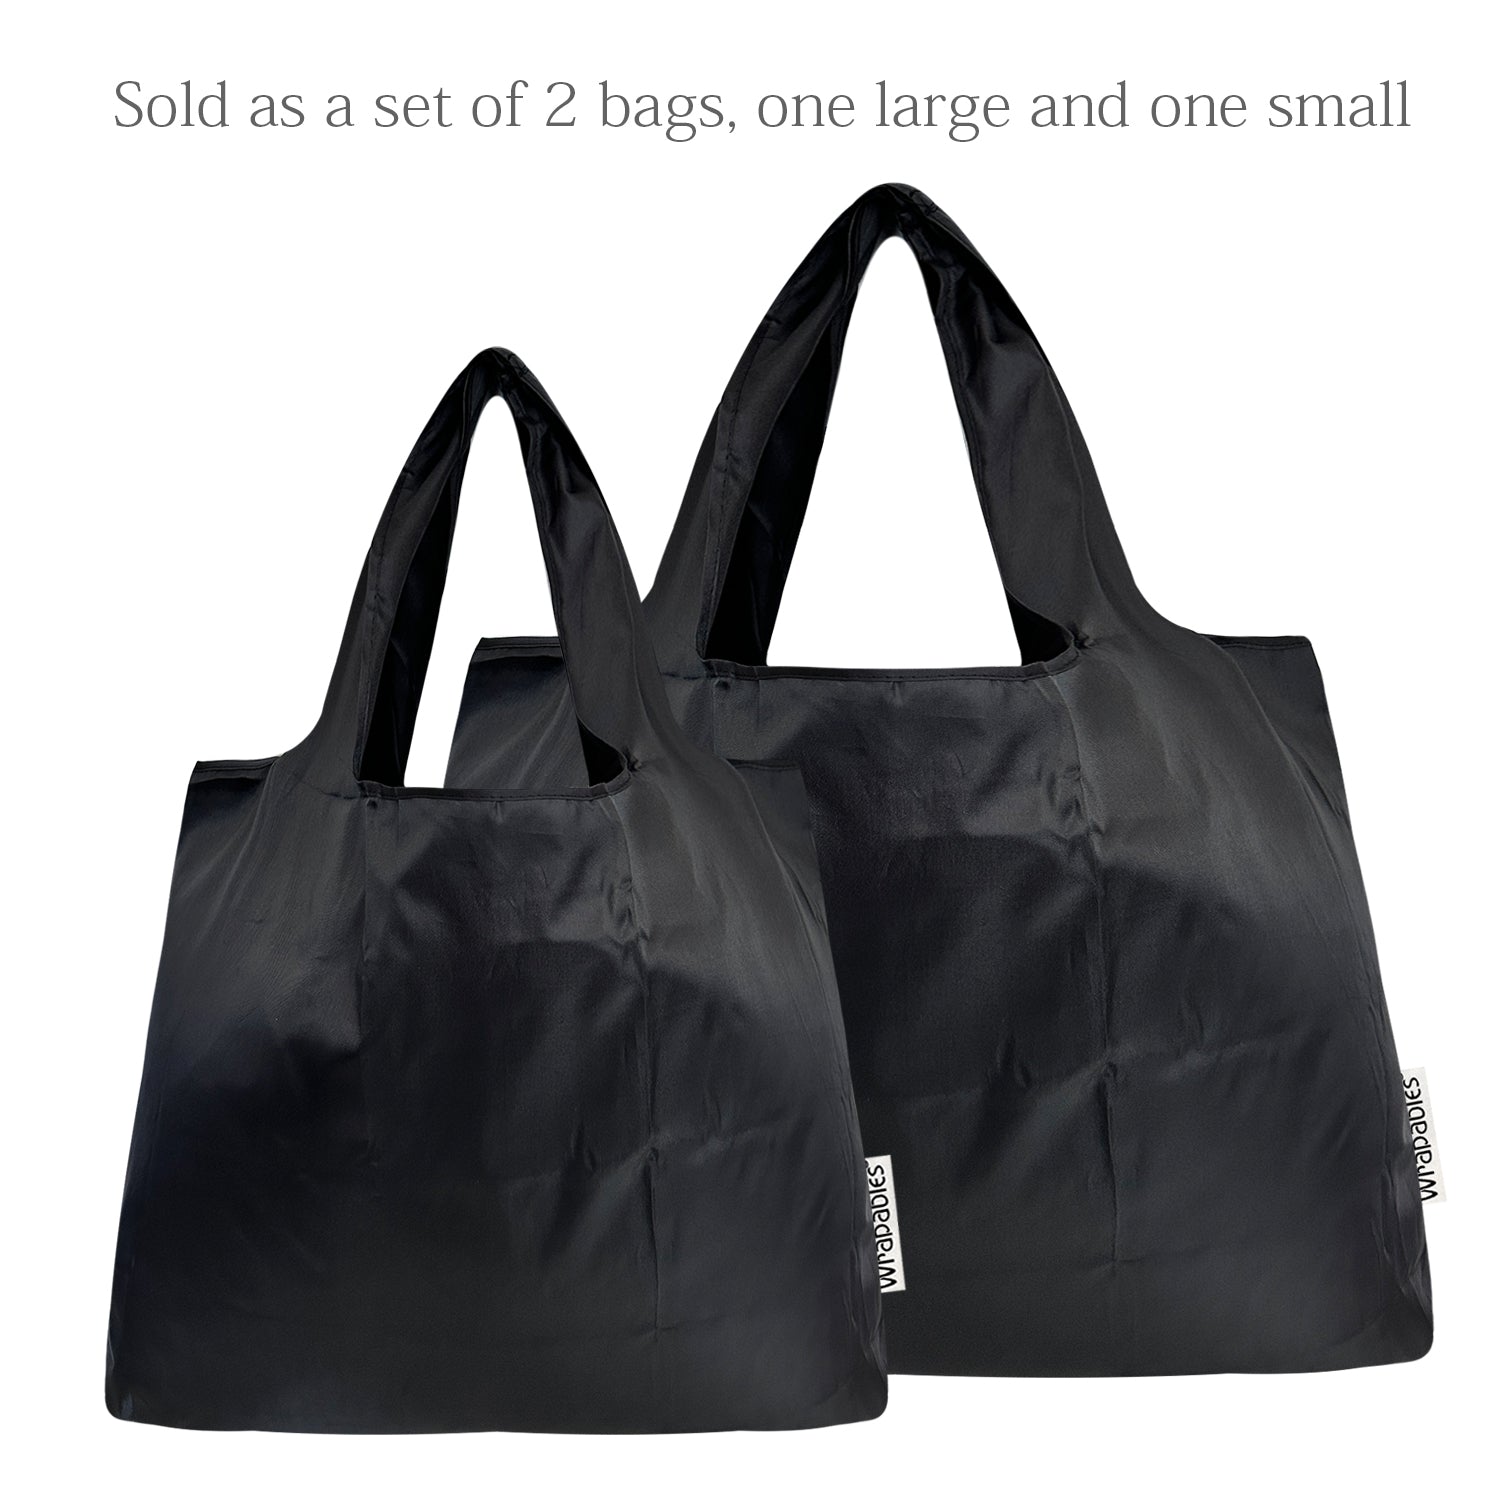 Wrapables Large & Small Foldable Tote Nylon Reusable Grocery Bags, Set of 2, Black